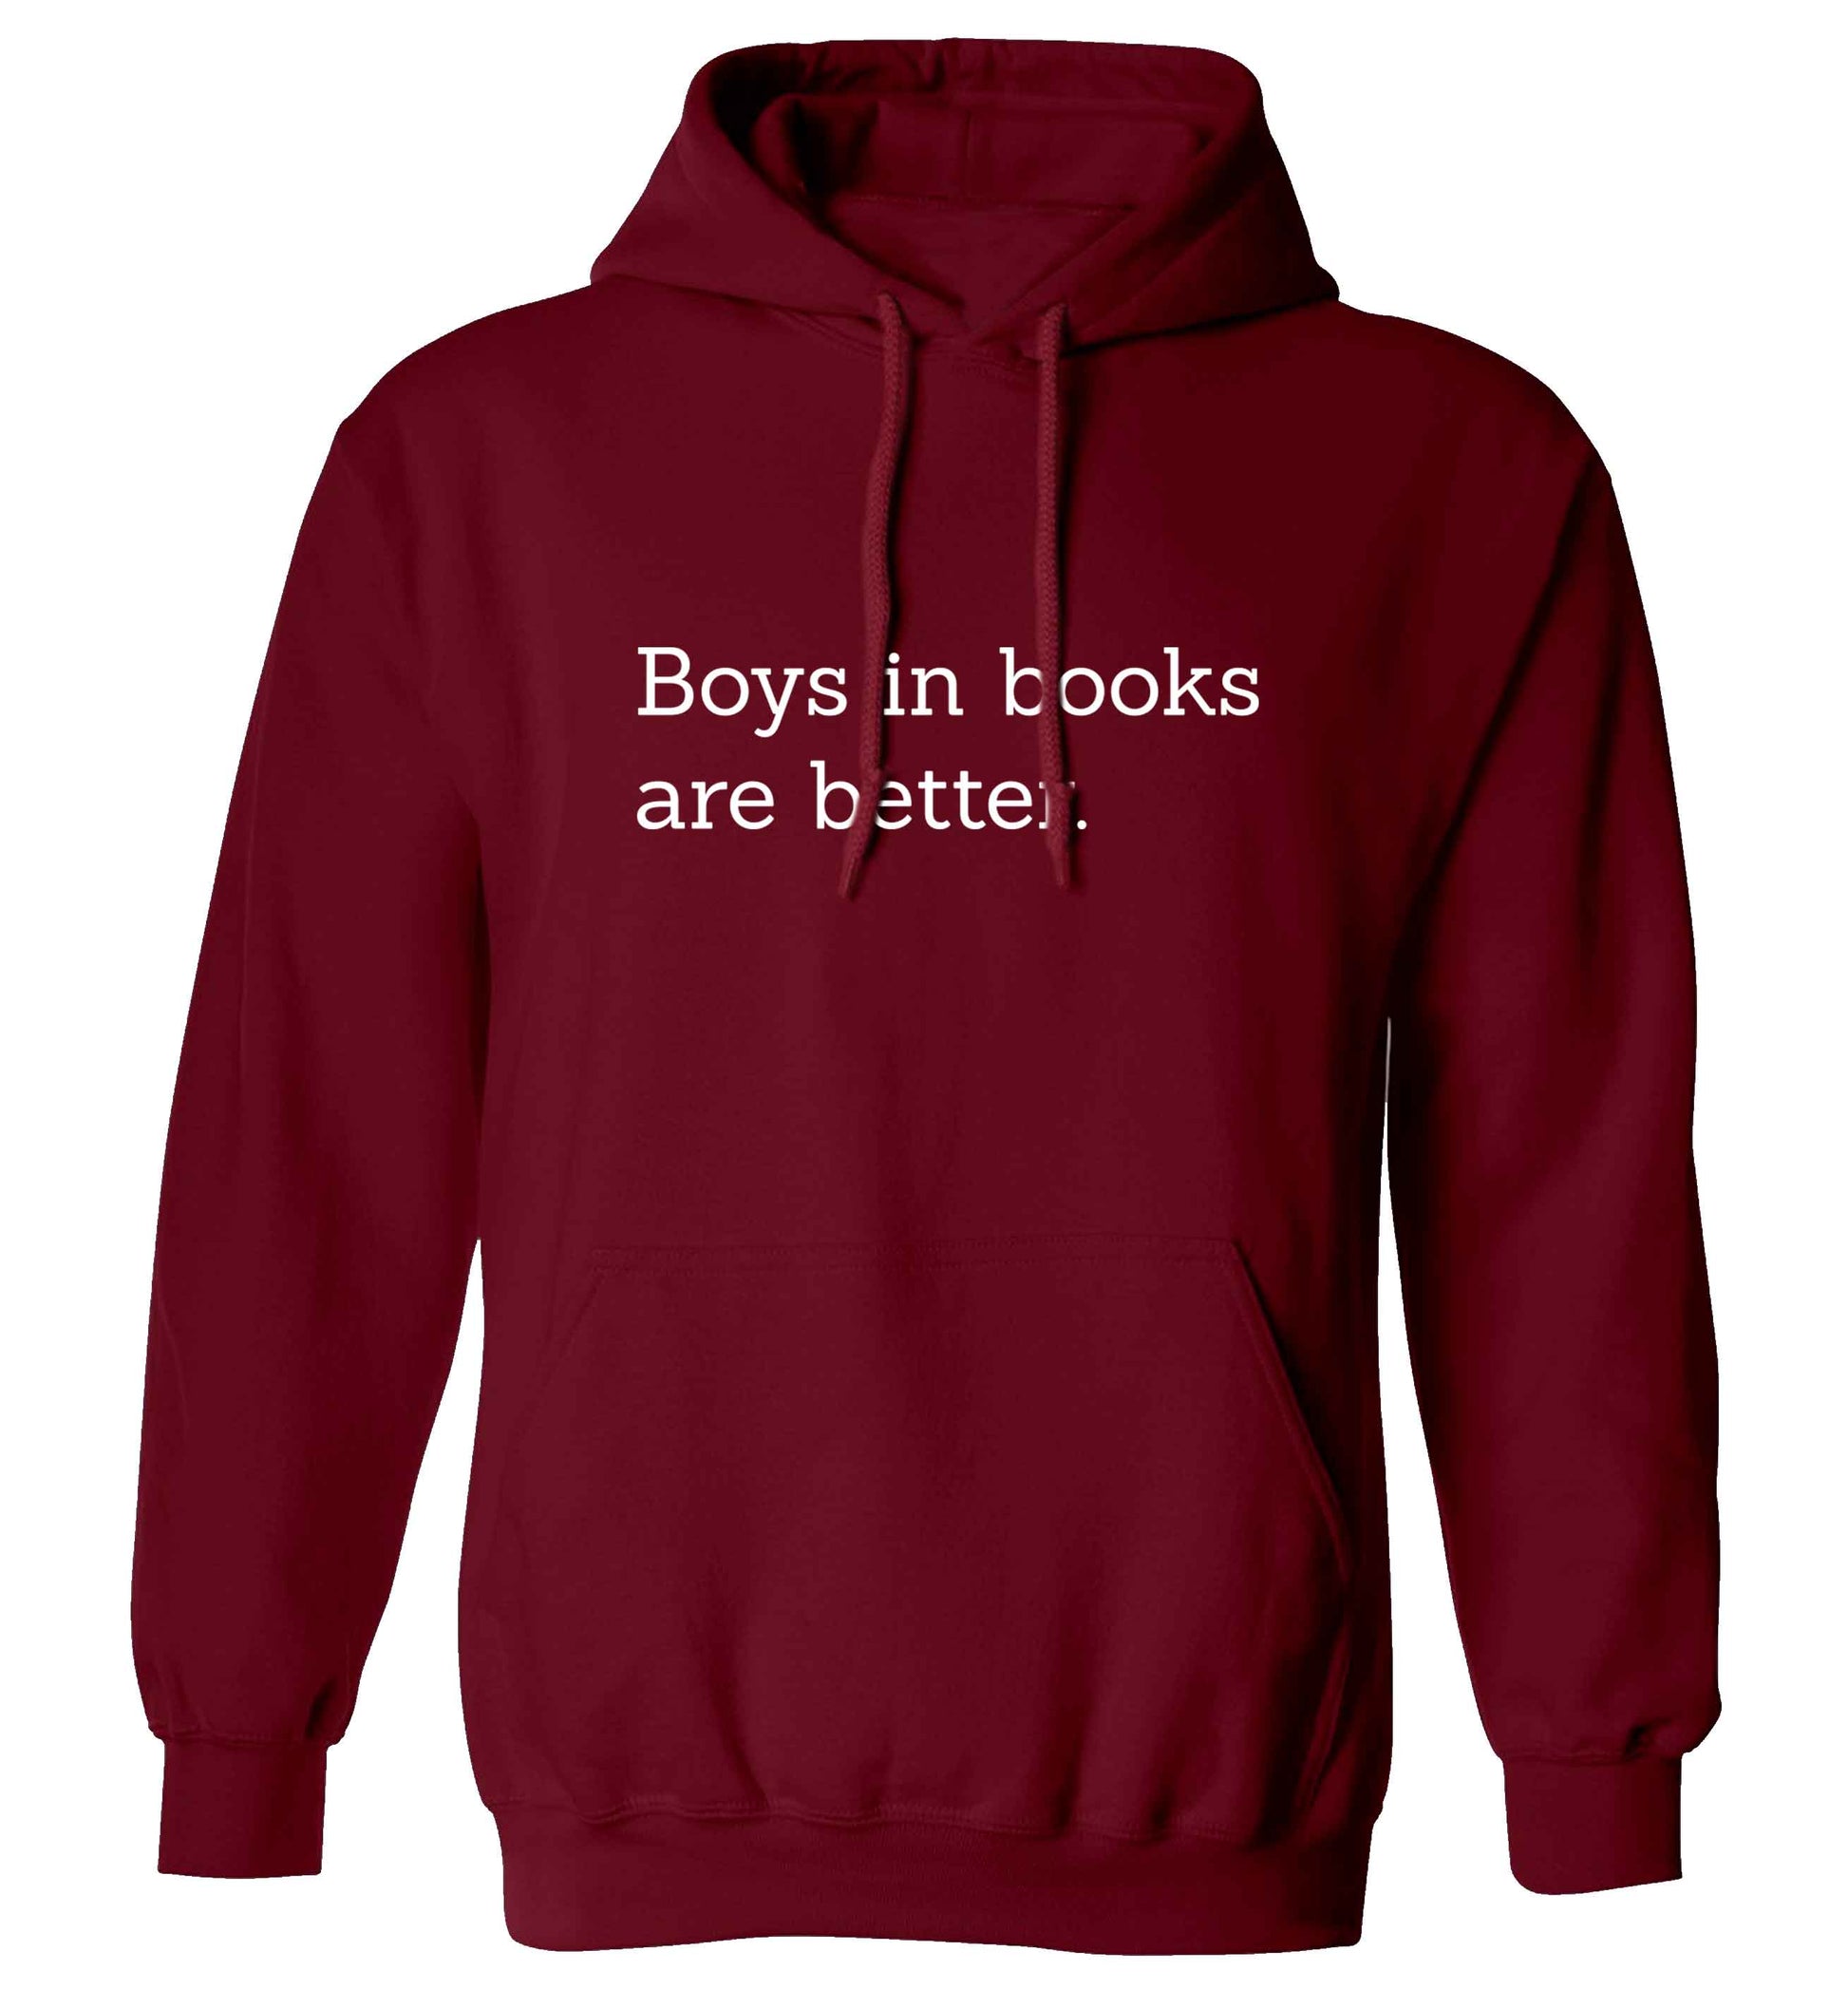 Boys in books are better adults unisex maroon hoodie 2XL